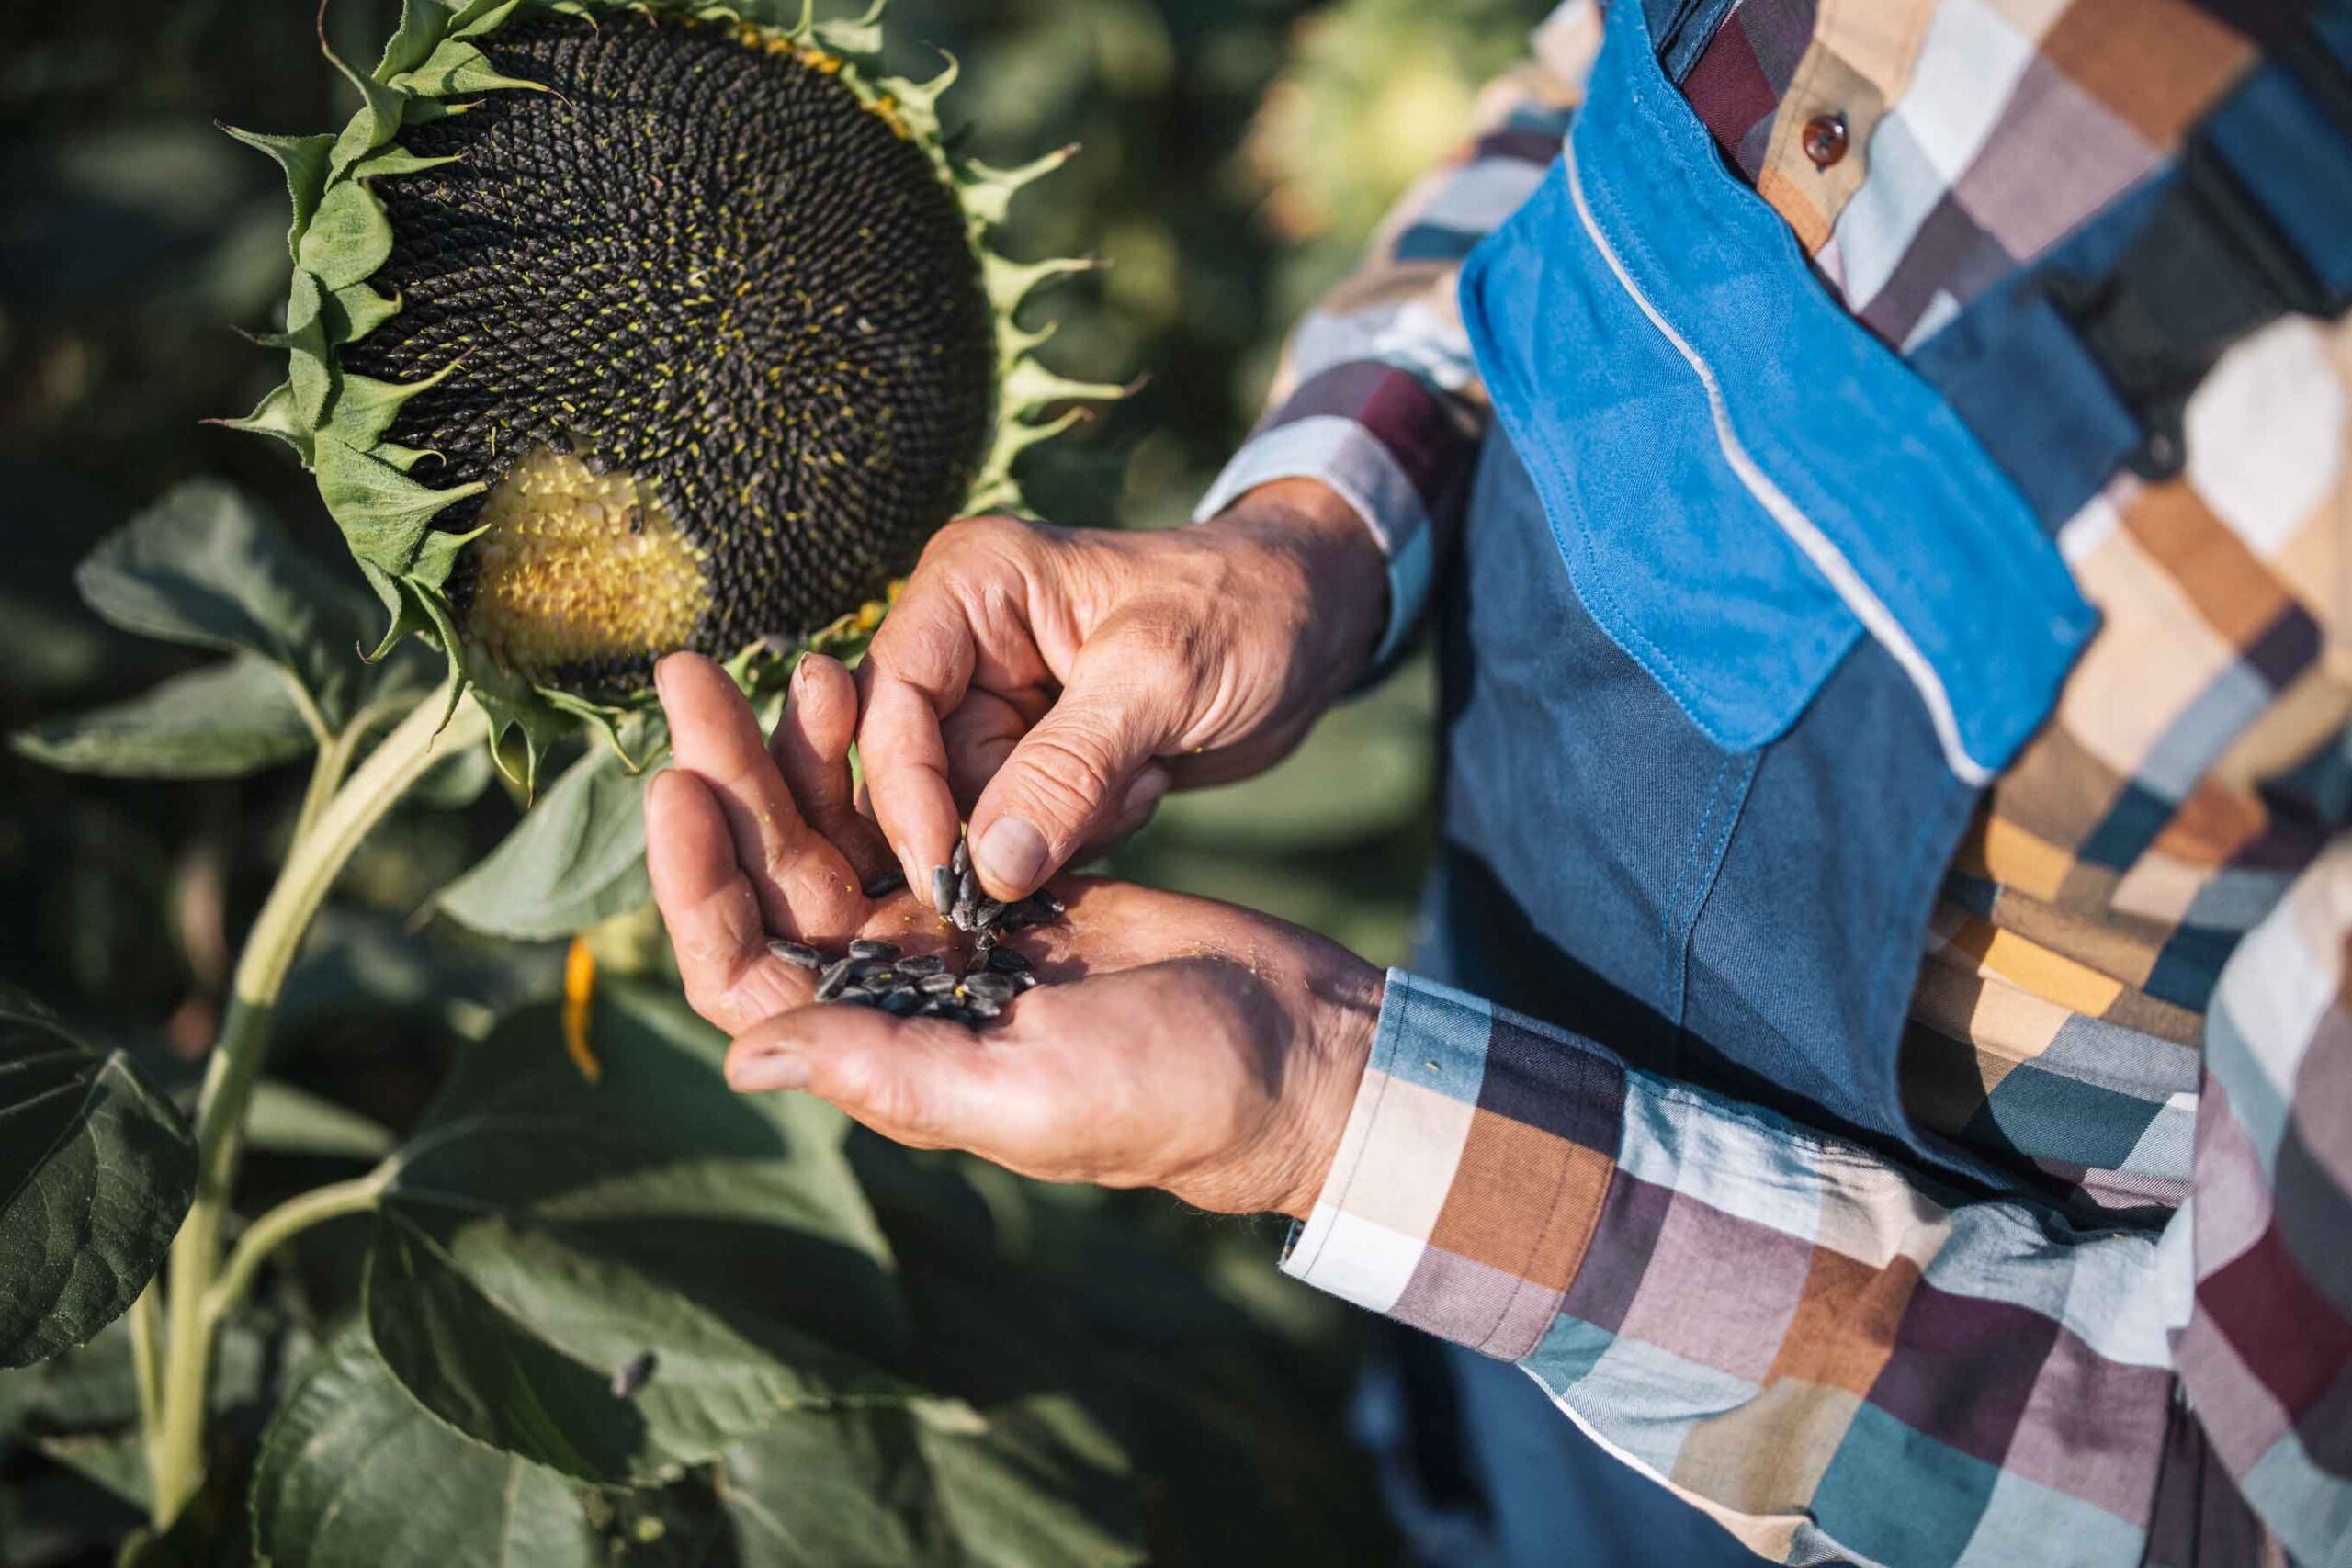 A man in overalls next to a sunflower holding sunflower seeds that have been removed from the flower in his hand.